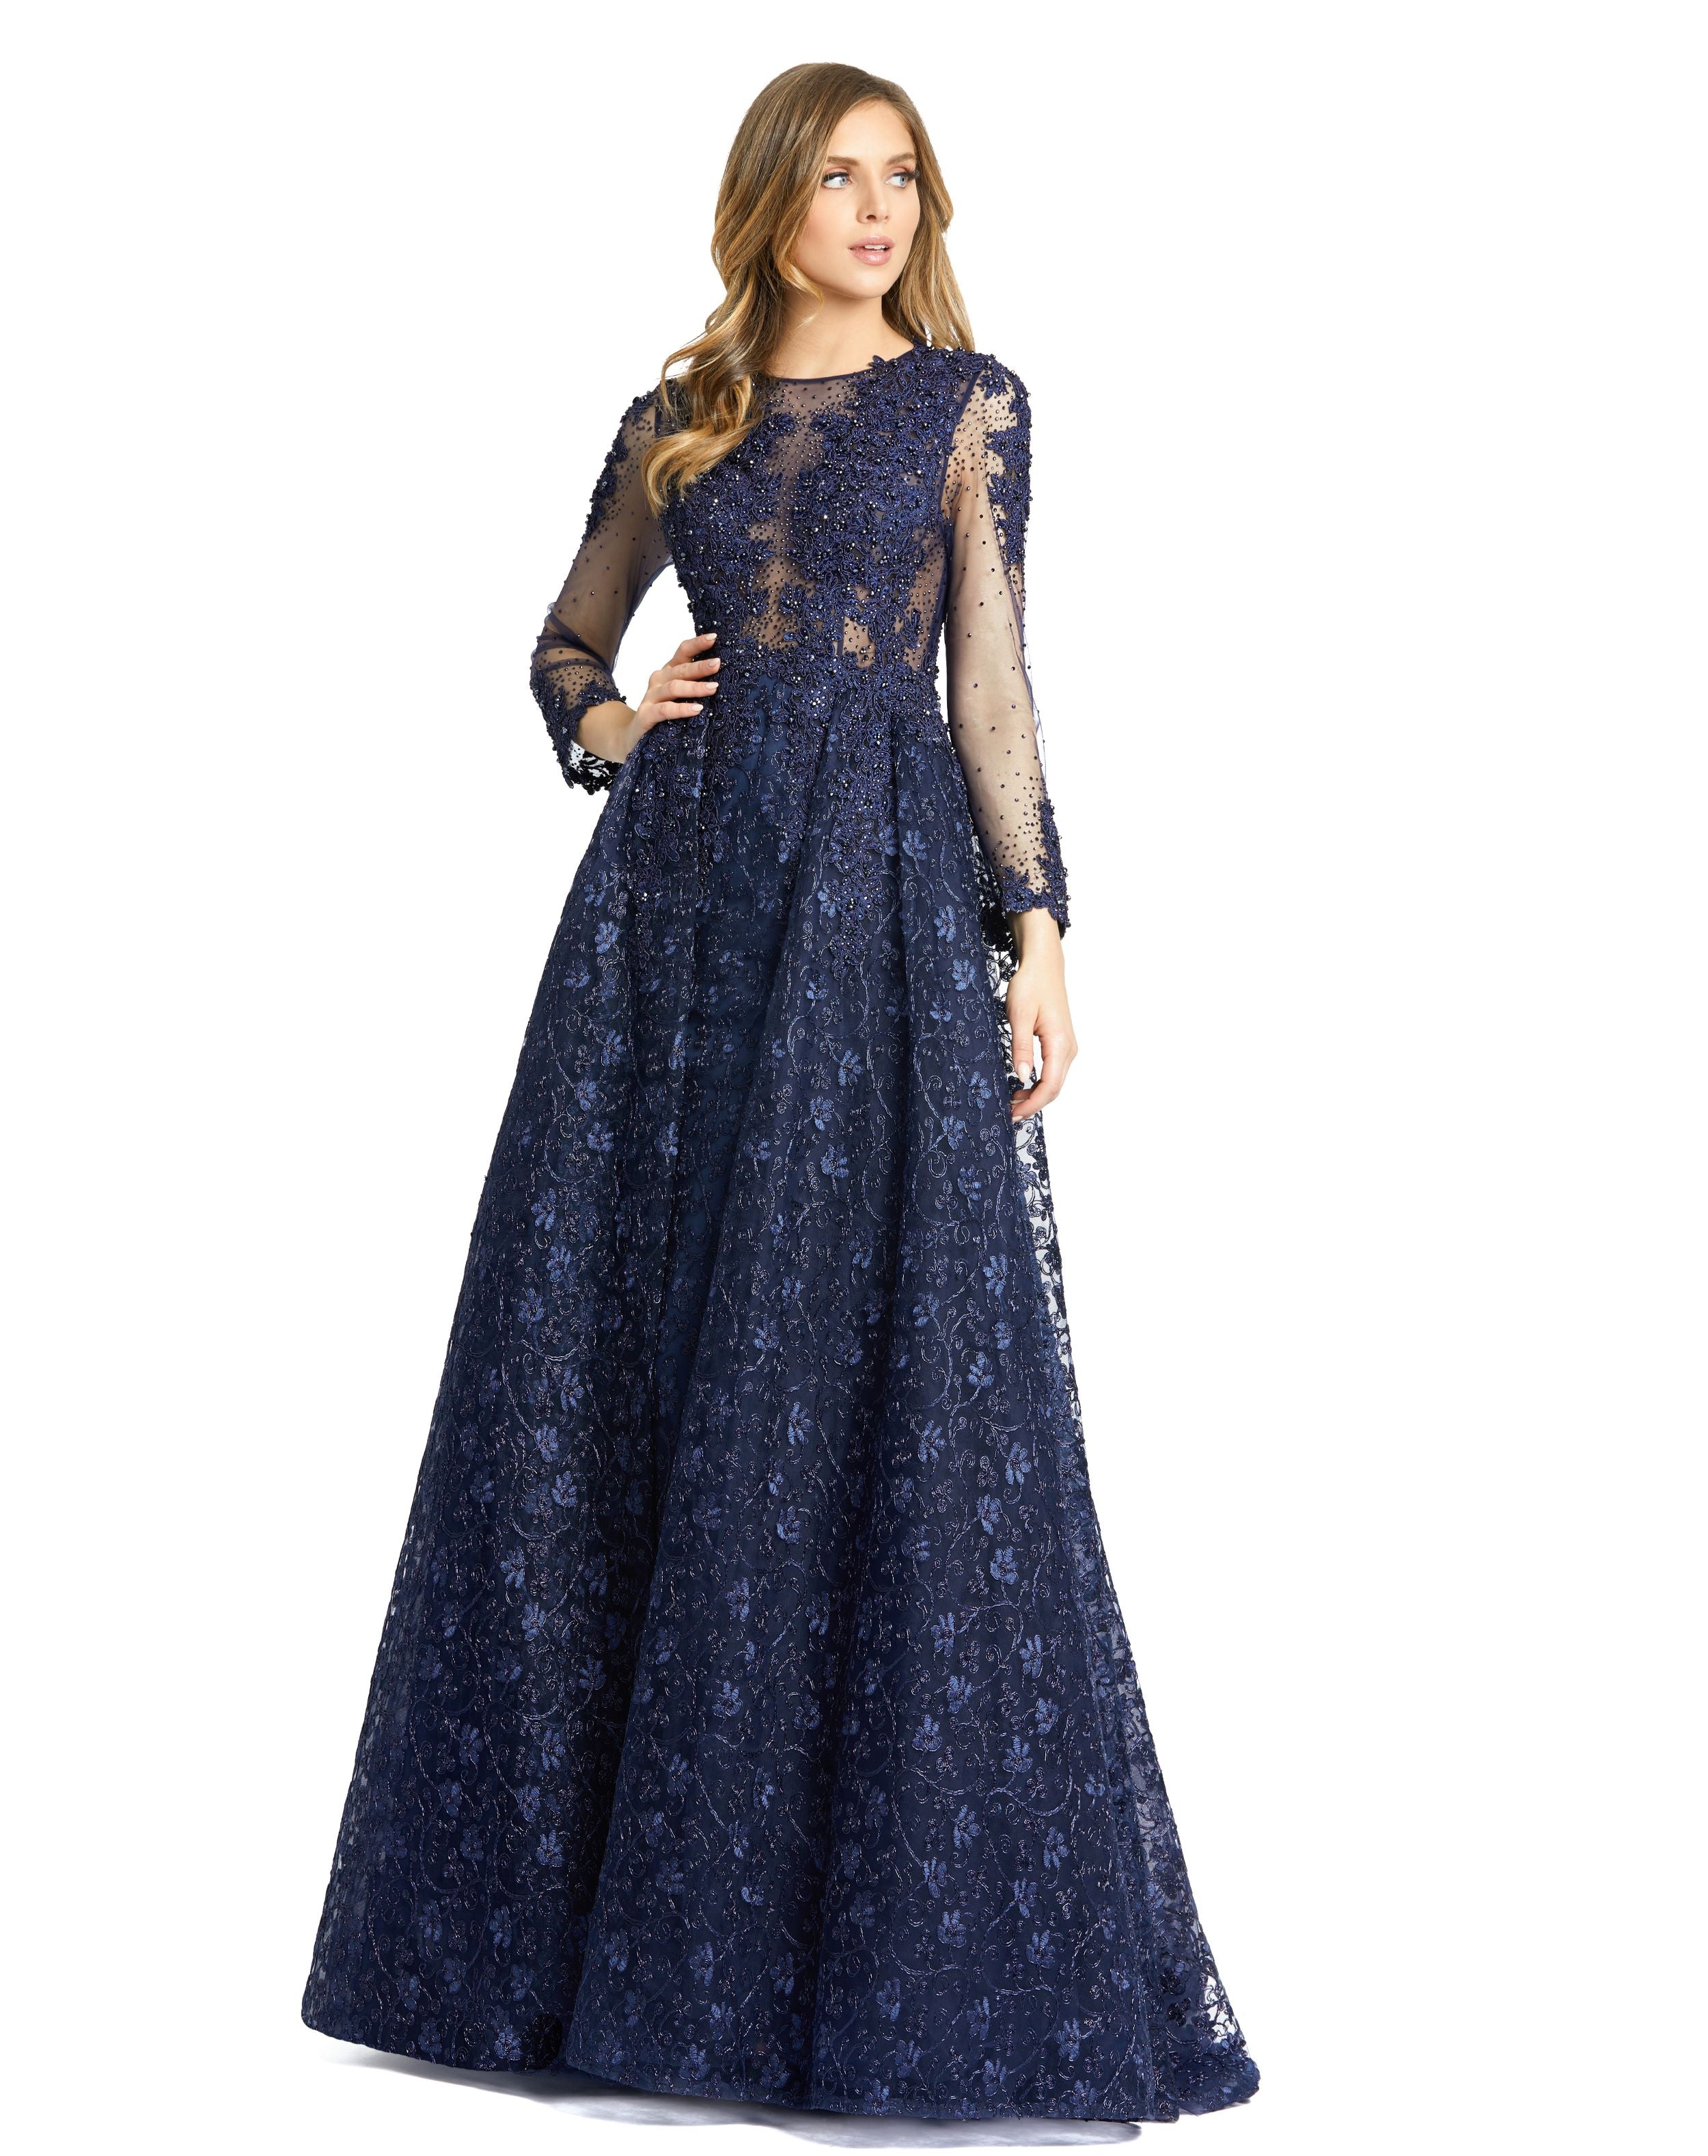 Embellished Illusion Long Sleeve A-Line Gown – Mac Duggal